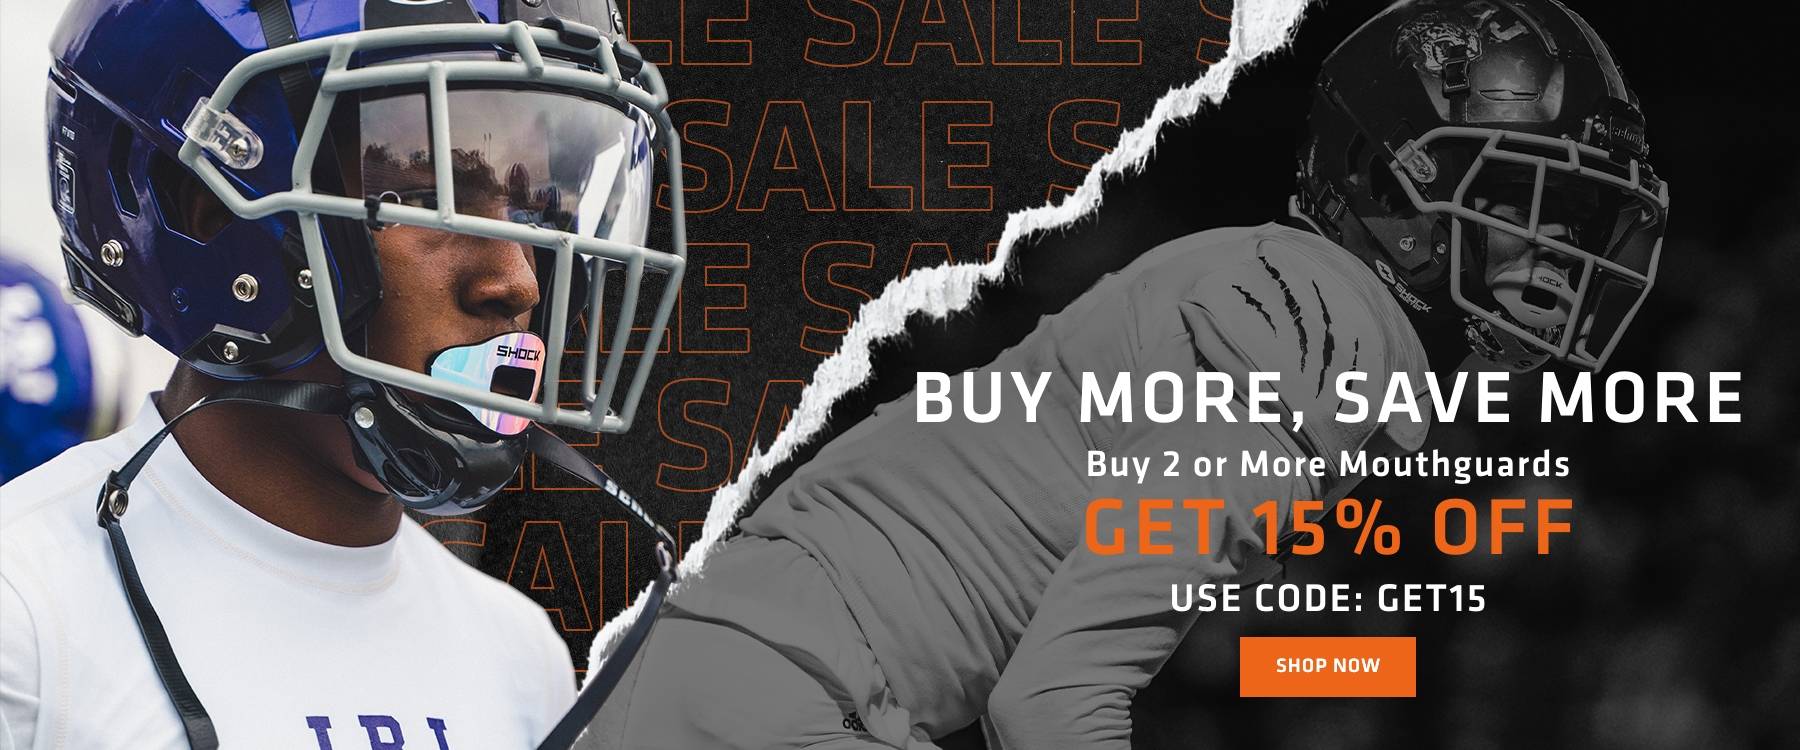 Buy More, Save More - Buy 2 or More Mouthguards - Get 15% Off - Use Code: GET15 - Shop Now